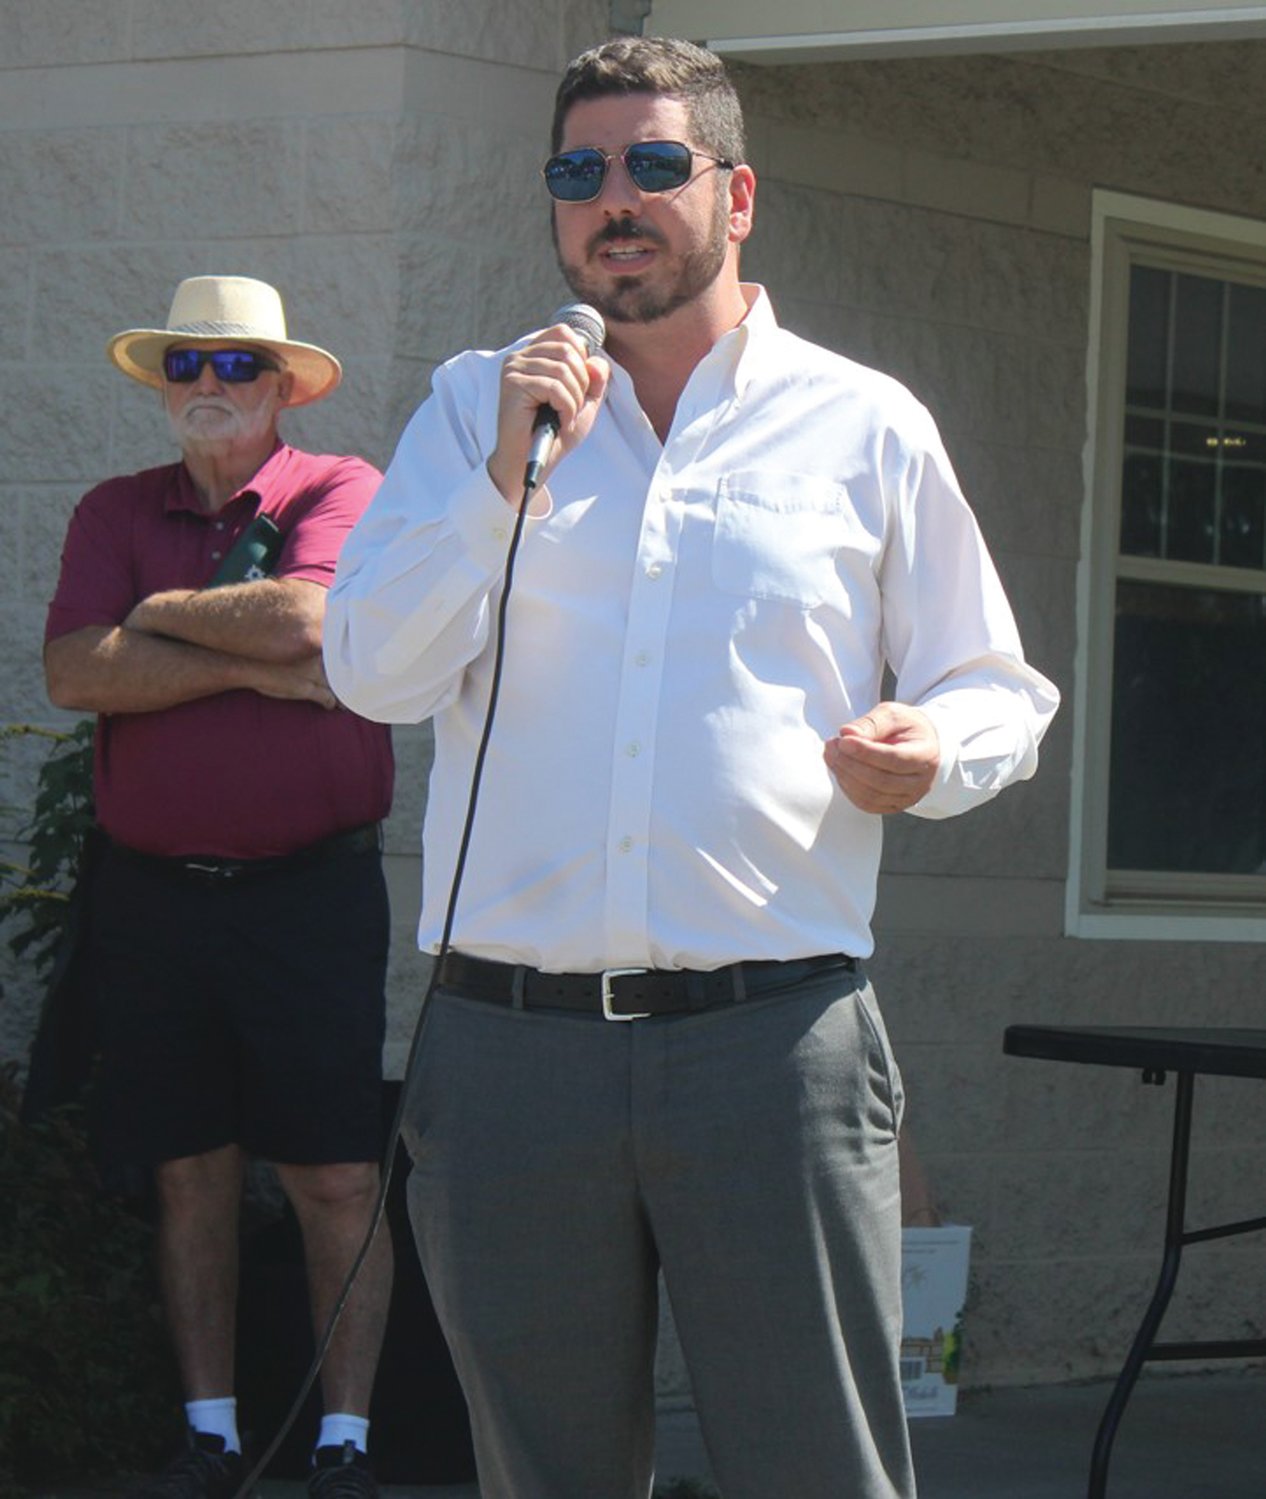 SPECIAL SPEAKER: Warwick State Rep. Joseph J. Solomon Jr. had two honors last Friday – delivering a special speech and starting the 78-player Albert “Cookie” Memorial Golf Tournament that will benefit Operation Stand Down, Save the Bay and the establishment of a scholarship foundation.